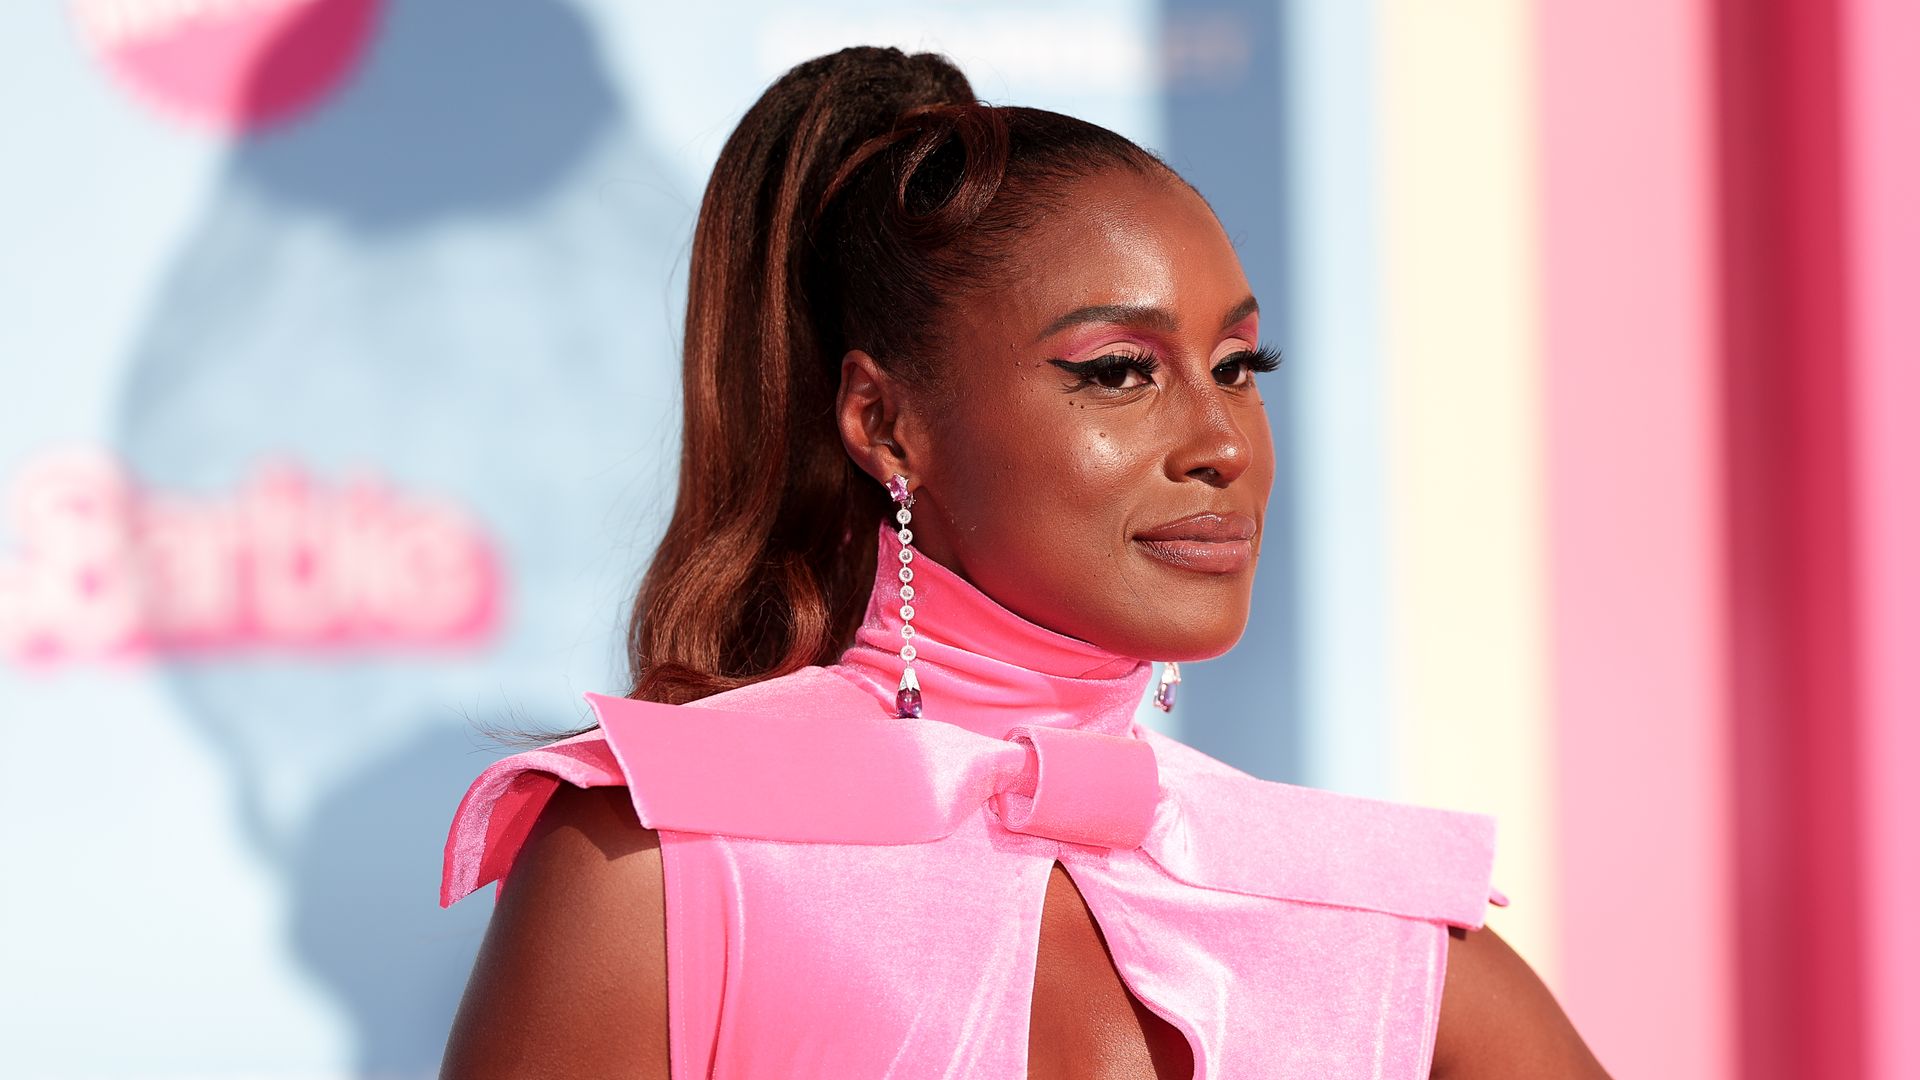 Issa Rae at the premiere of "Barbie" held at Shrine Auditorium and Expo Hall on July 9, 2023 in Los Angeles, California